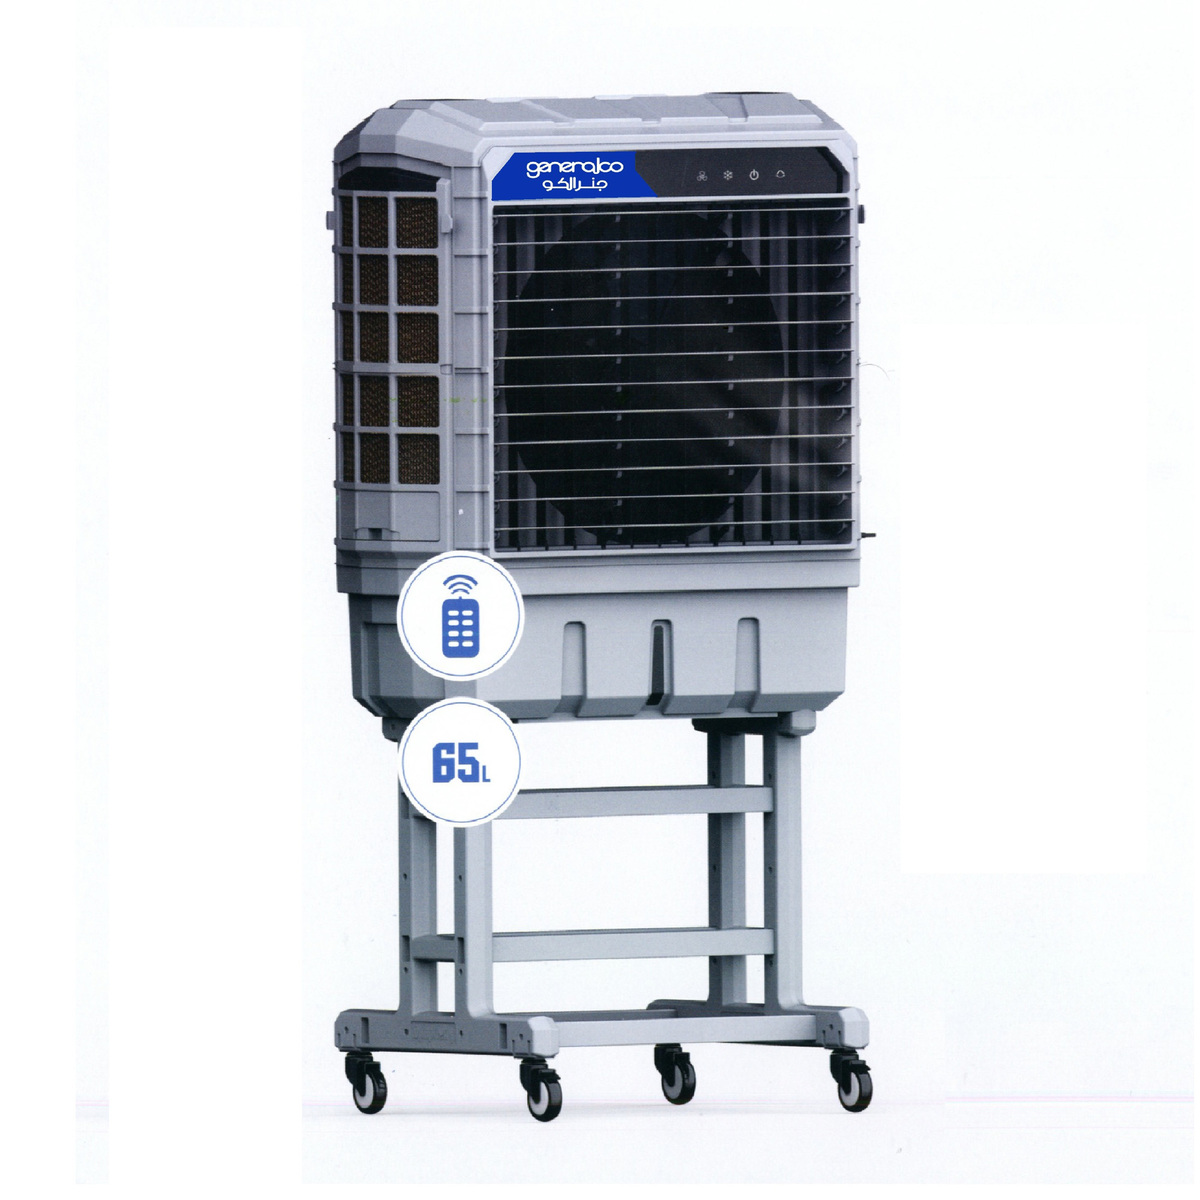 Generalco Air Cooler with Powerful 3 Speed Fan, 65 L, GAC-L65i